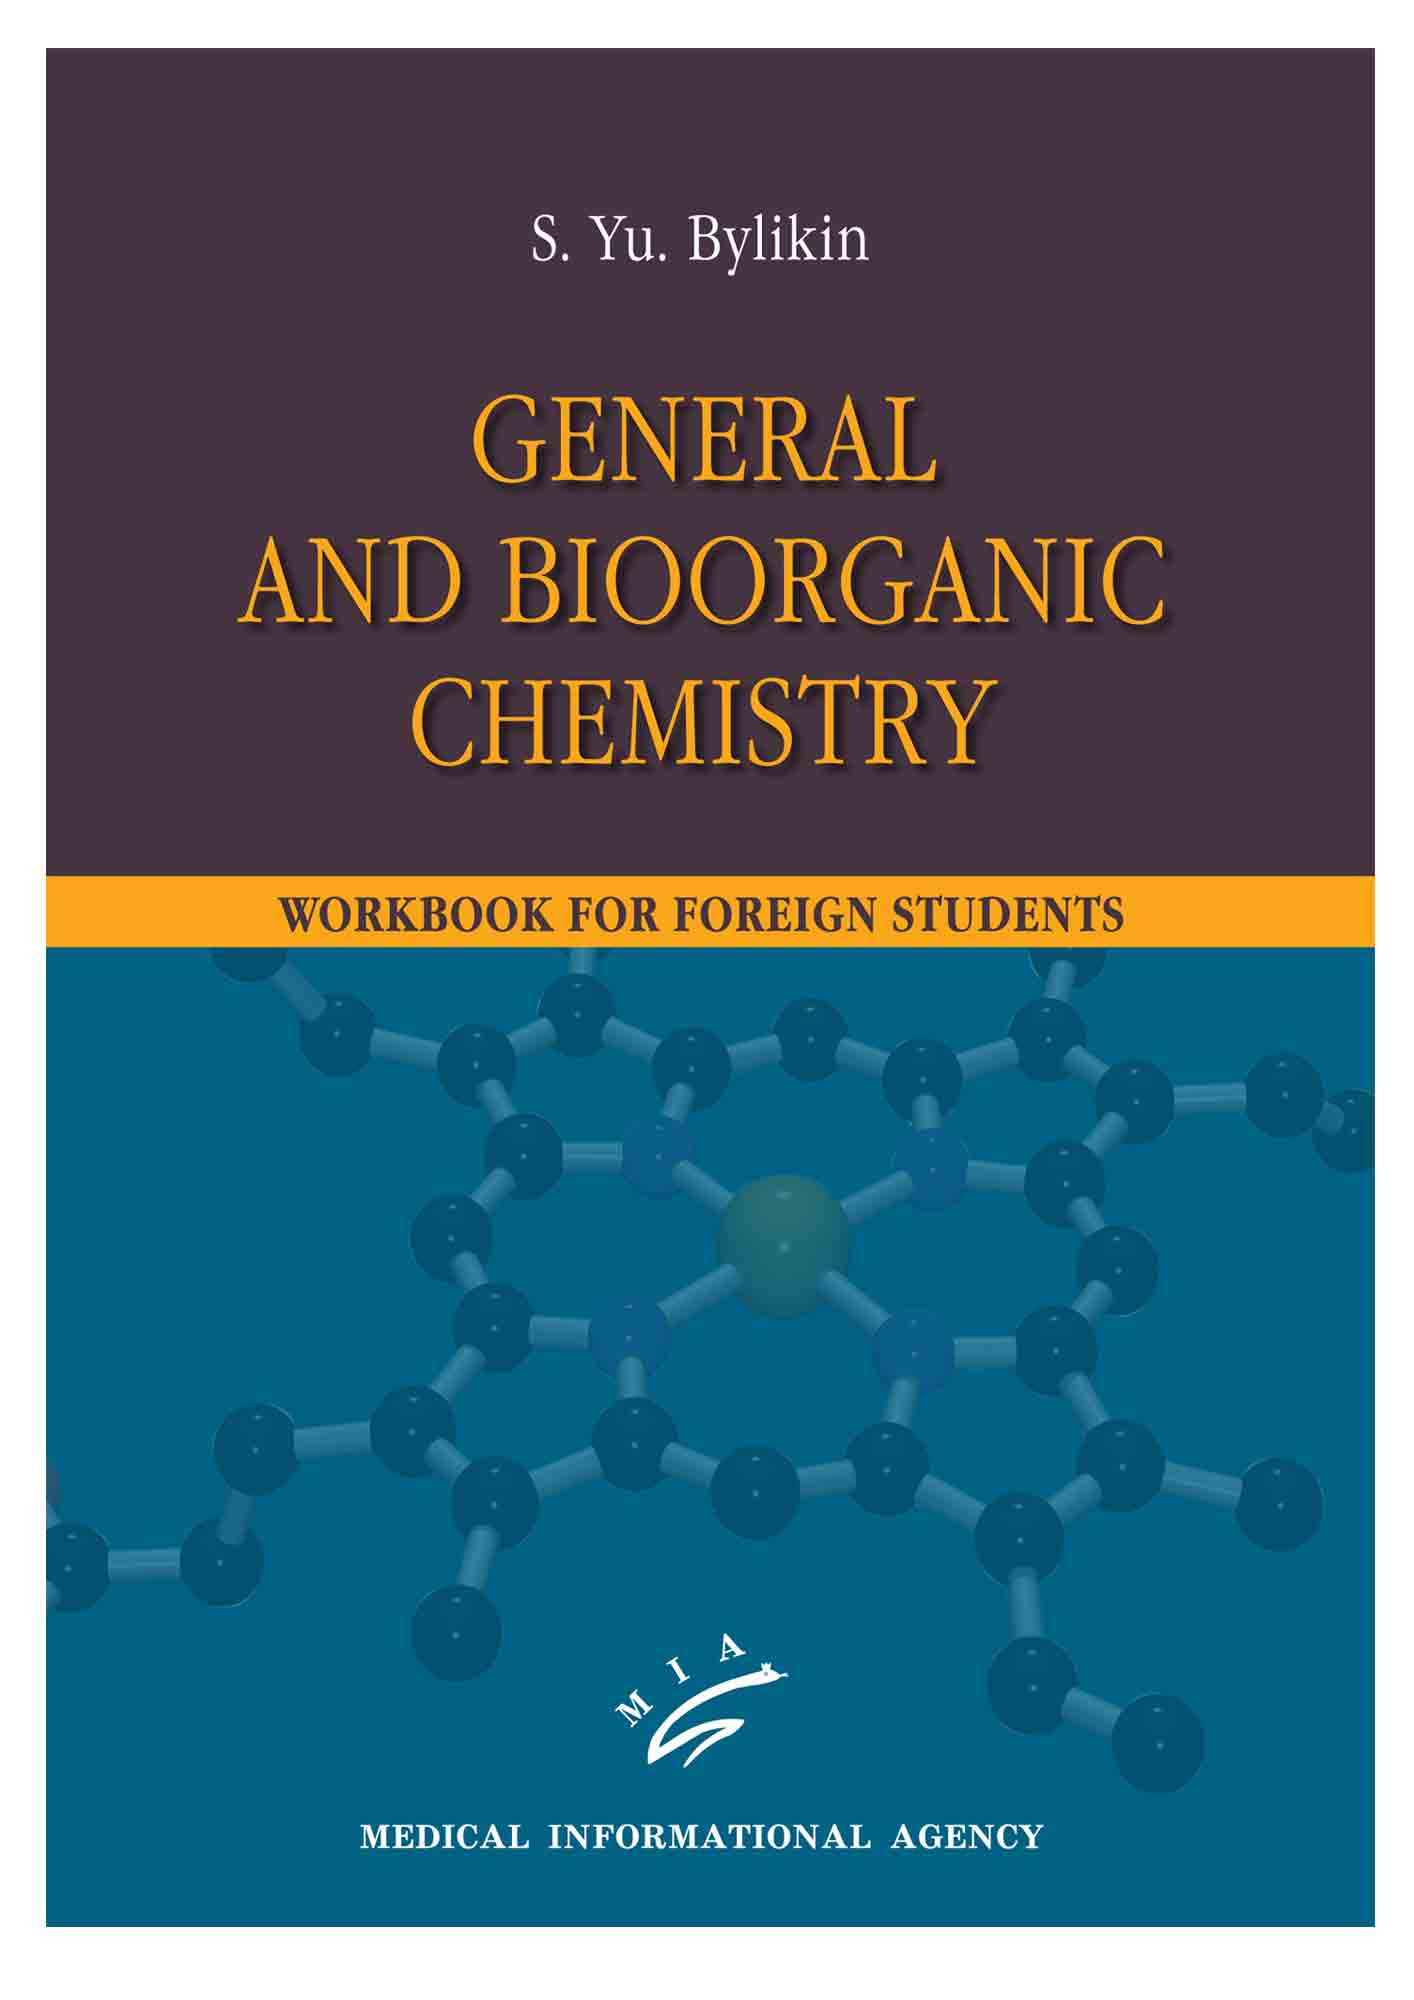  ..     / General and Bioorganic chemistry. Workbook for foreign students 